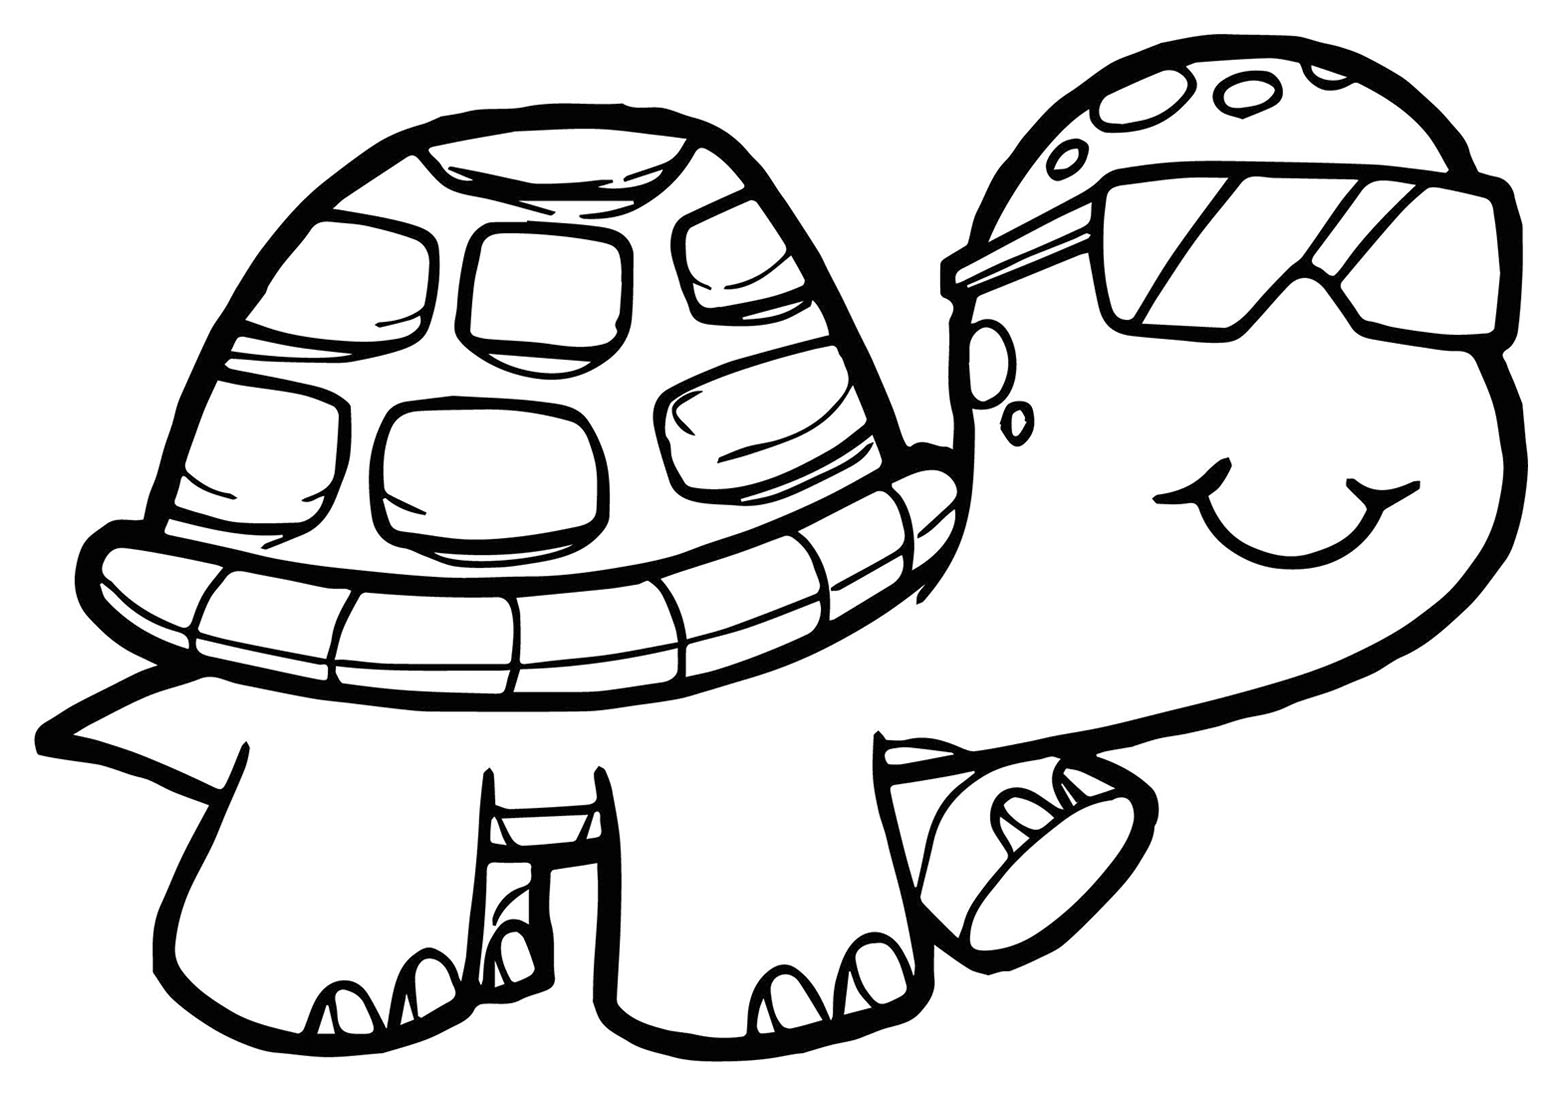 Turtles free to color for kids Turtles Kids Coloring Pages